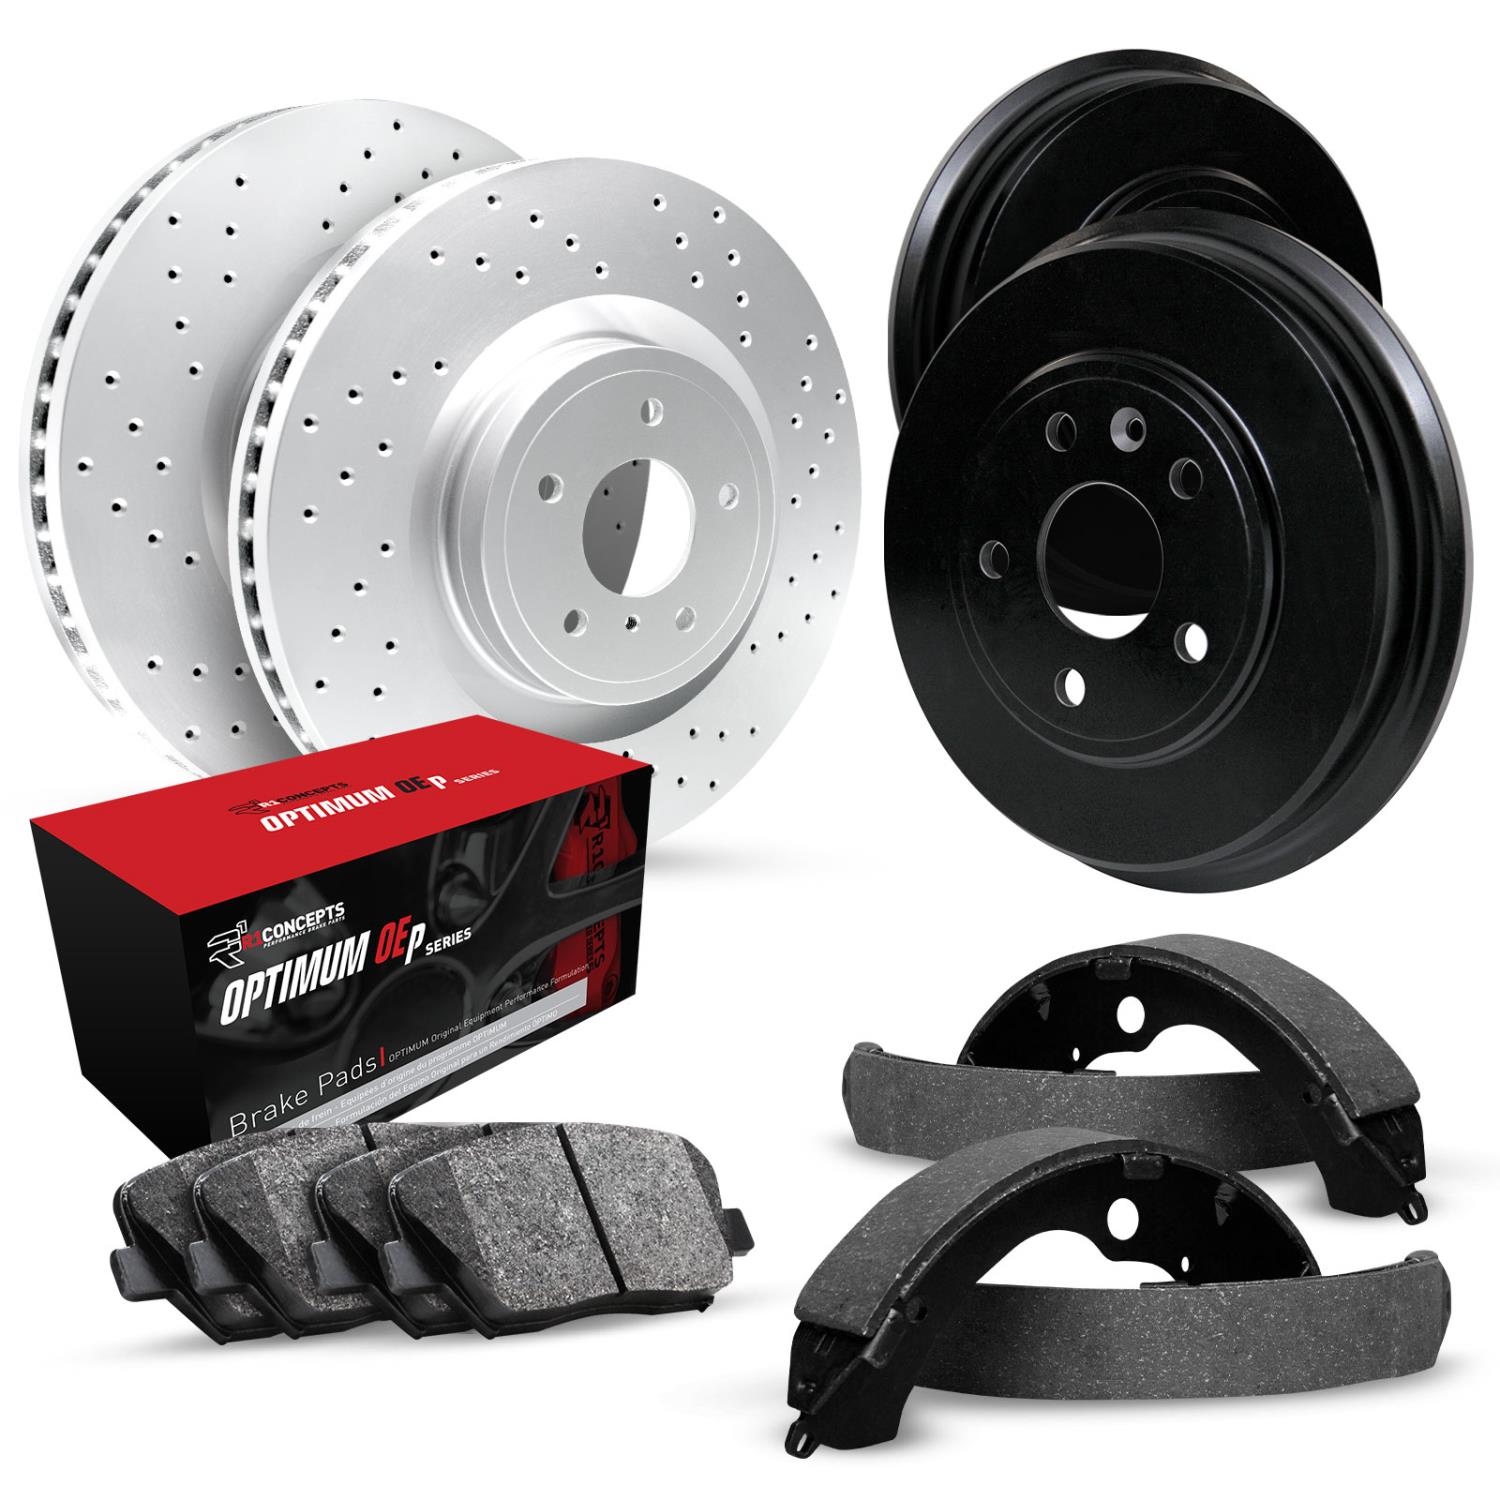 GEO-Carbon Drilled Brake Rotor & Drum Set w/Optimum OE Pads & Shoes, 1985-1997 Infiniti/Nissan, Position: Front & Rear